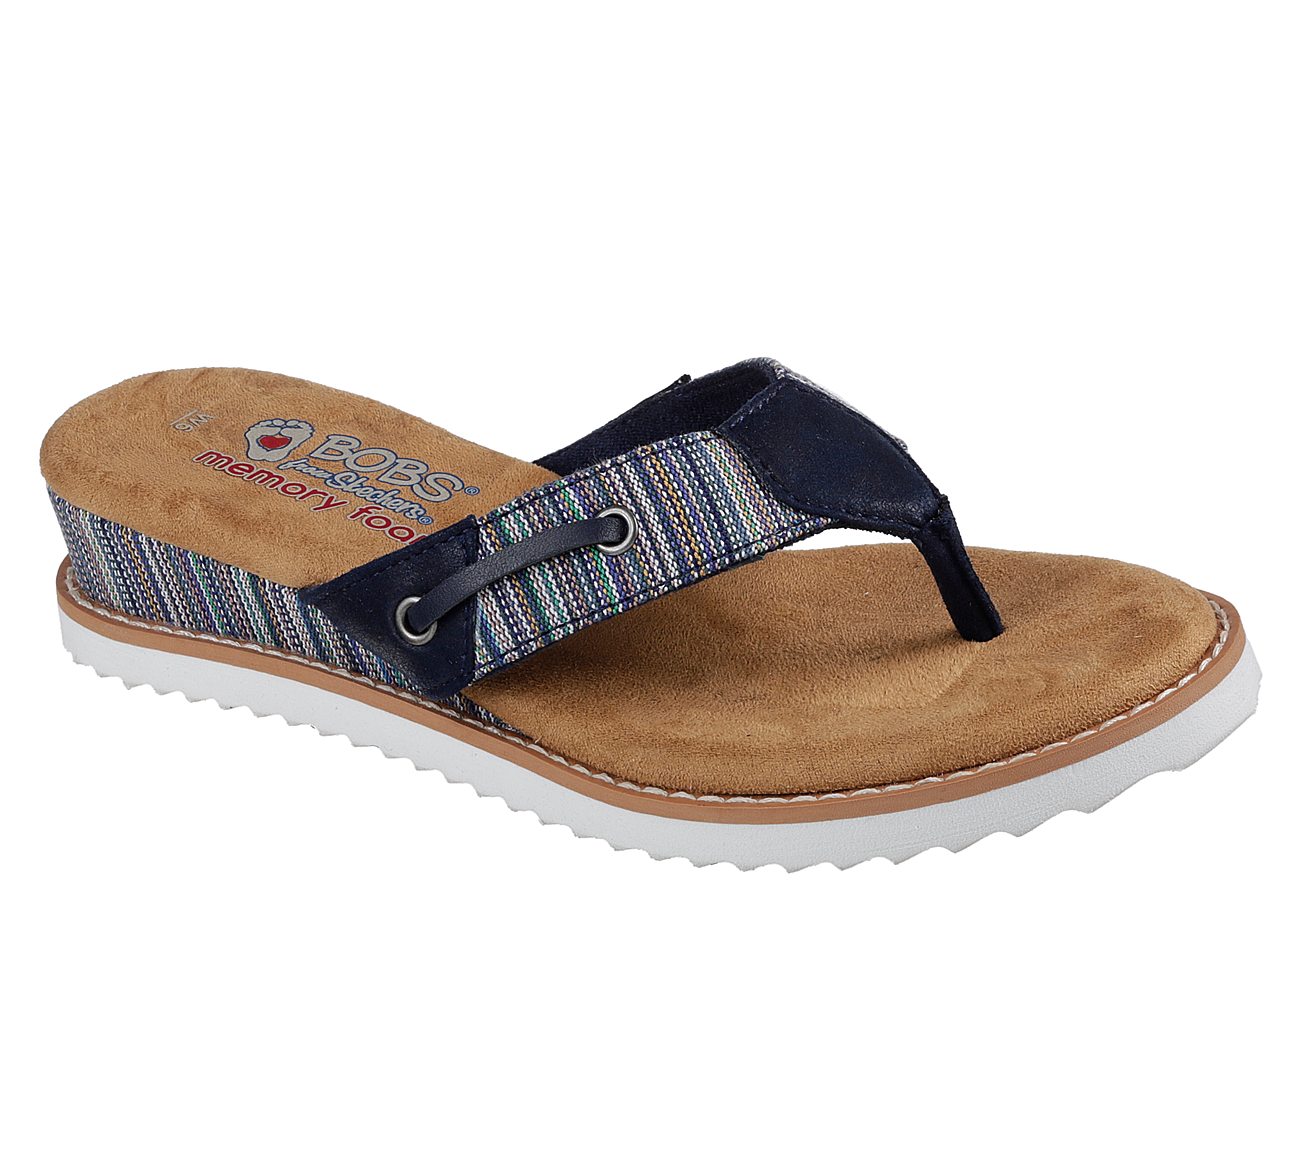 bobs by skechers sandals